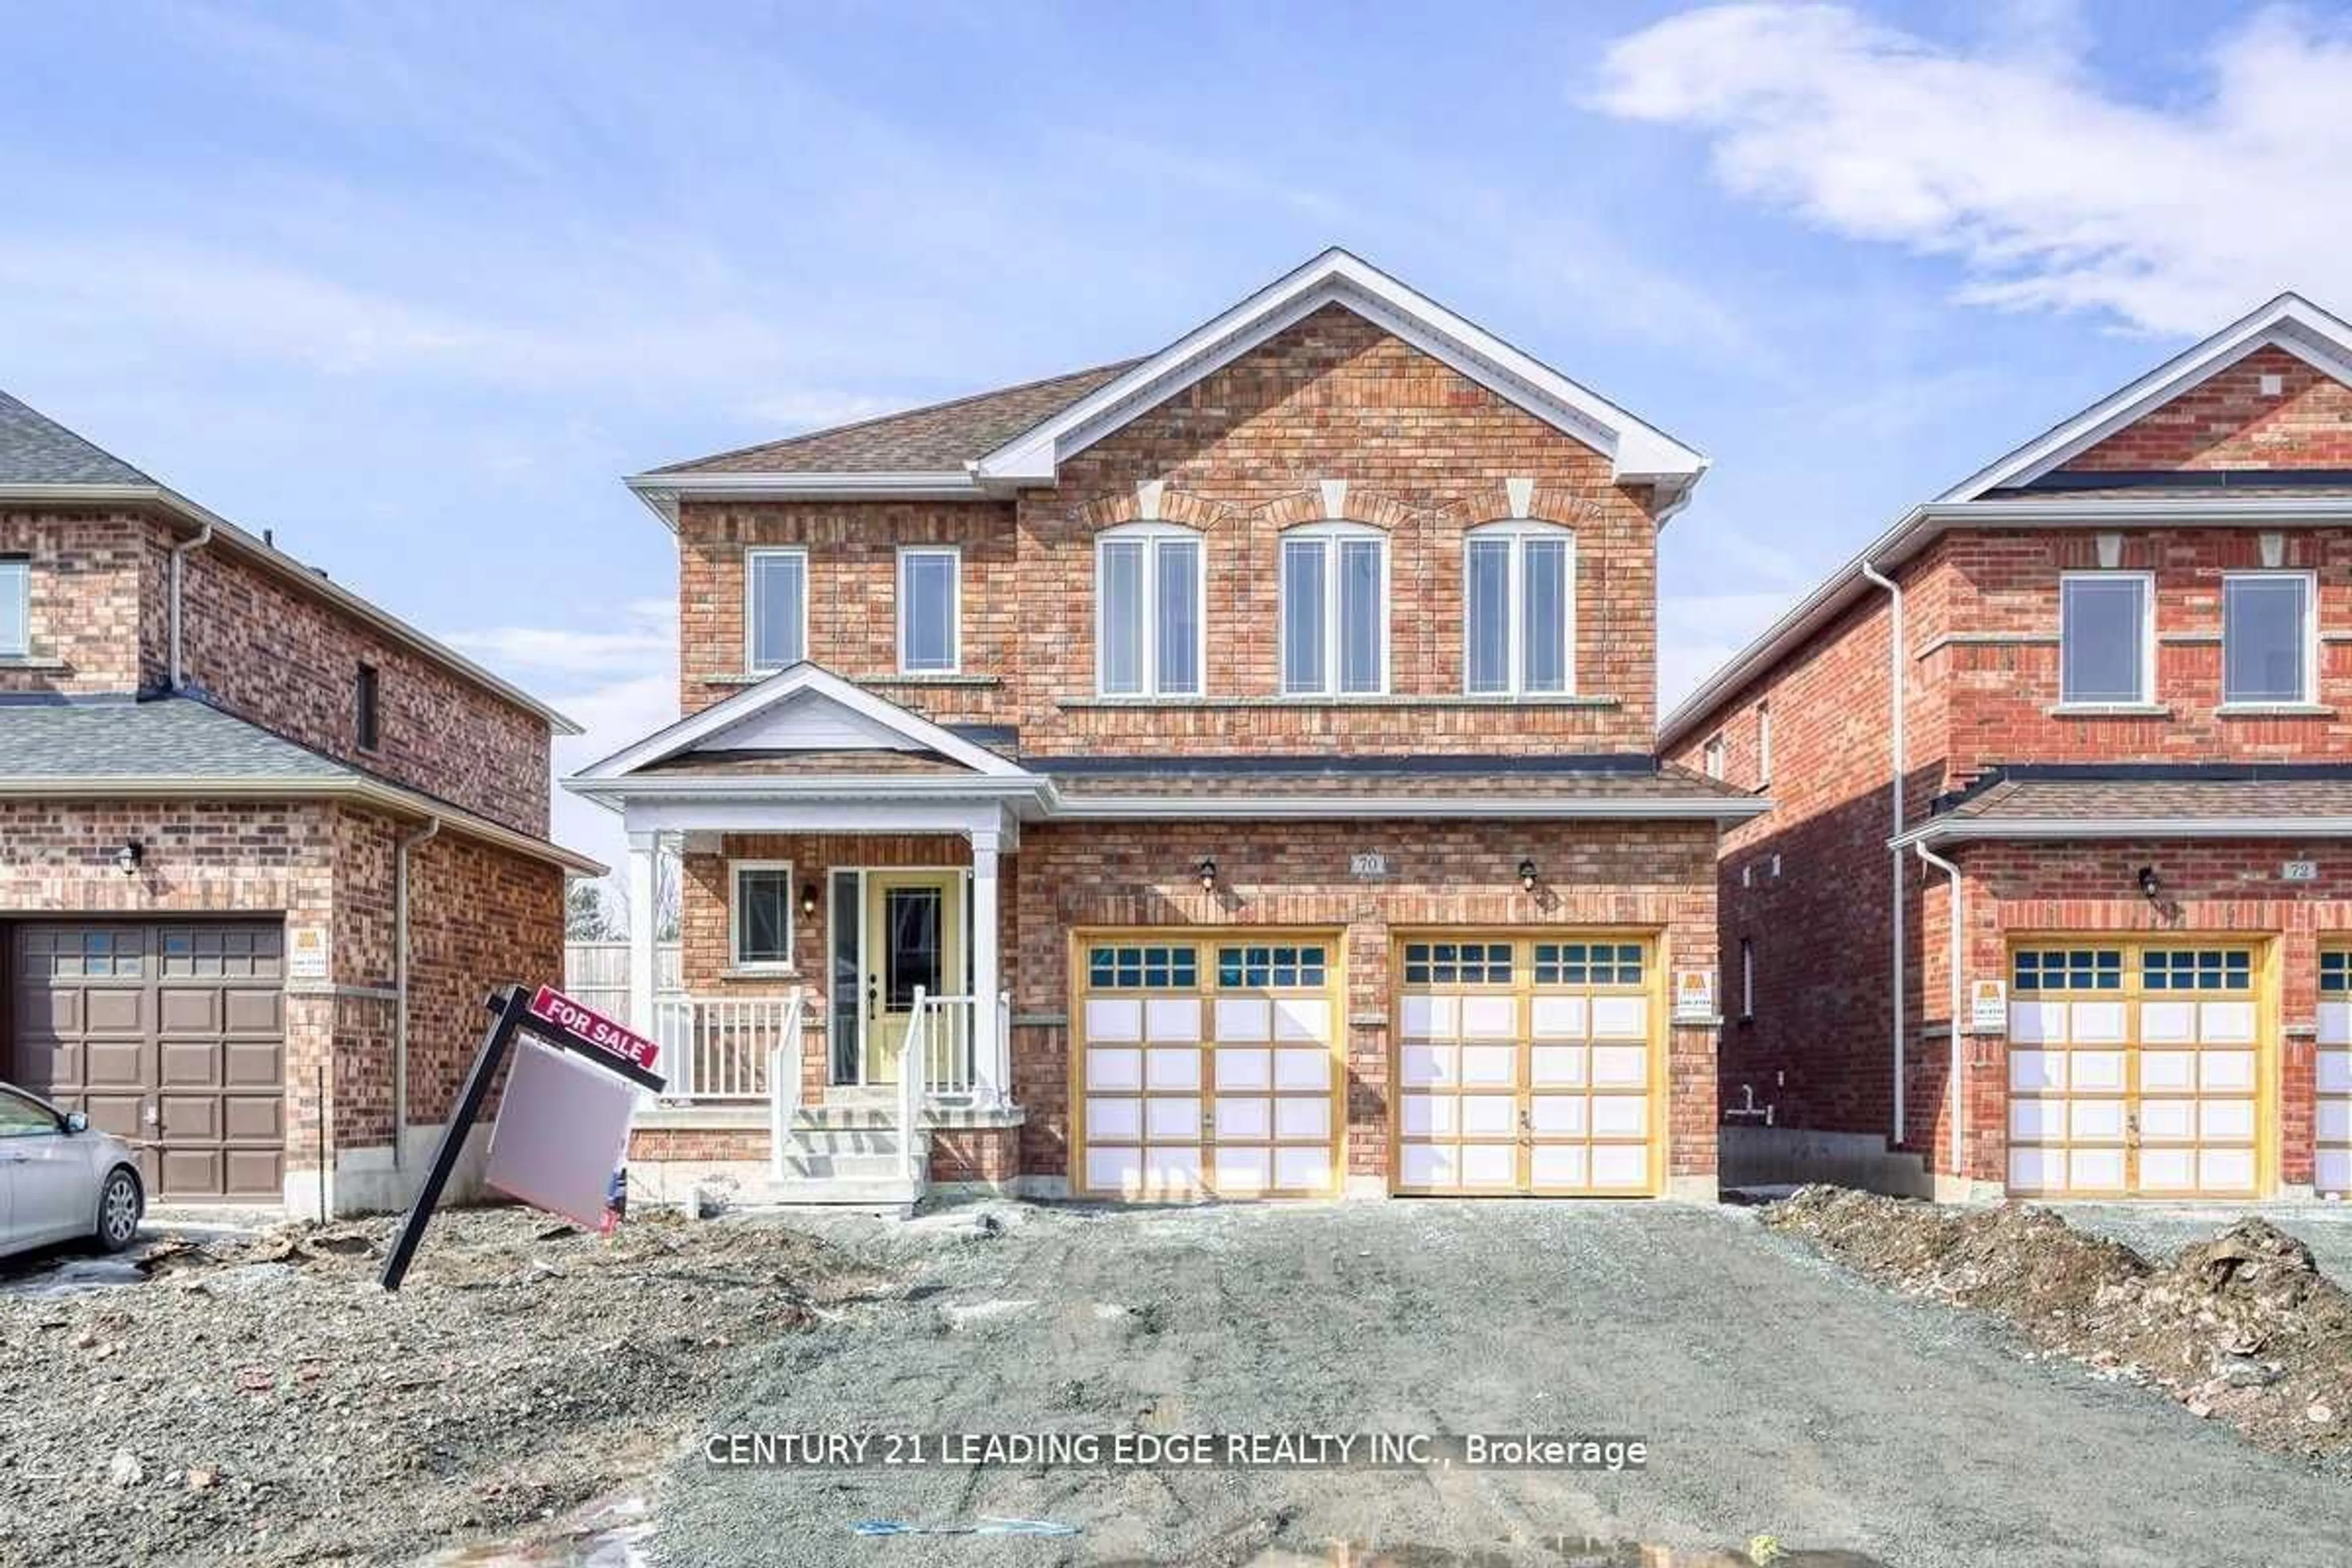 Home with brick exterior material for 70 Terry Clayton Ave, Brock Ontario L0K 1A0